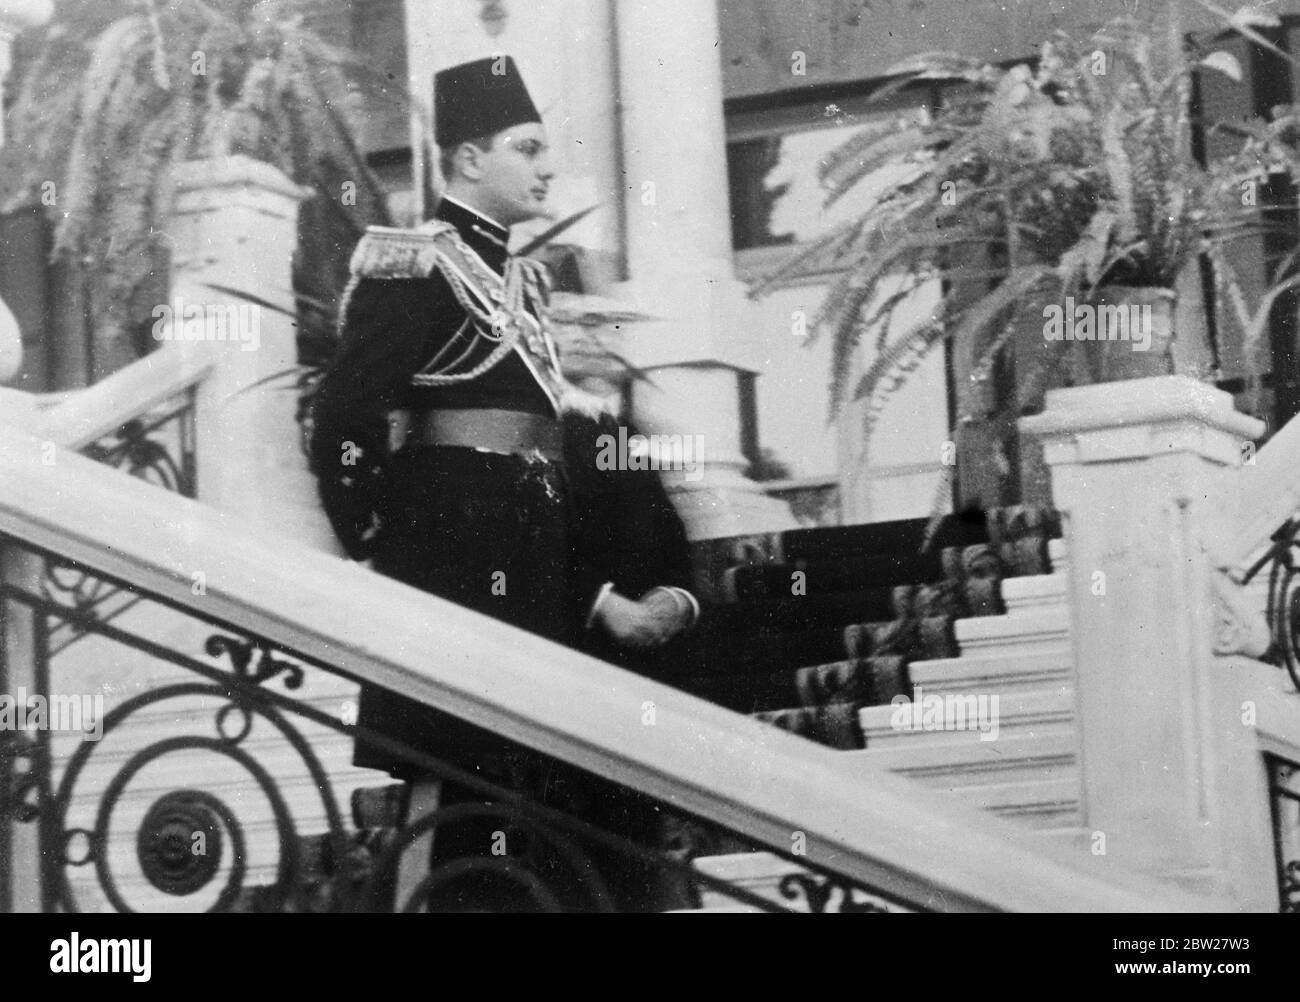 The wedding of King Farouk in Cairo. With traditional Muslim ceremony, 17-year-old King Farouk of Egypt, was married at the Koubbeh Palace in Cairo, to Miss Farida Zulficar Pasha, the judge of the Egyptian court of appeal. Photo shows, King Farouk as he waited anxiously to greet his bride at the Koubbeh Palace after the ceremony. After the marriage, at which she was not present, the bride returned home, going back to the Palace to join her bridegroom, some hours afterwards. 23 January 1938. Stock Photo